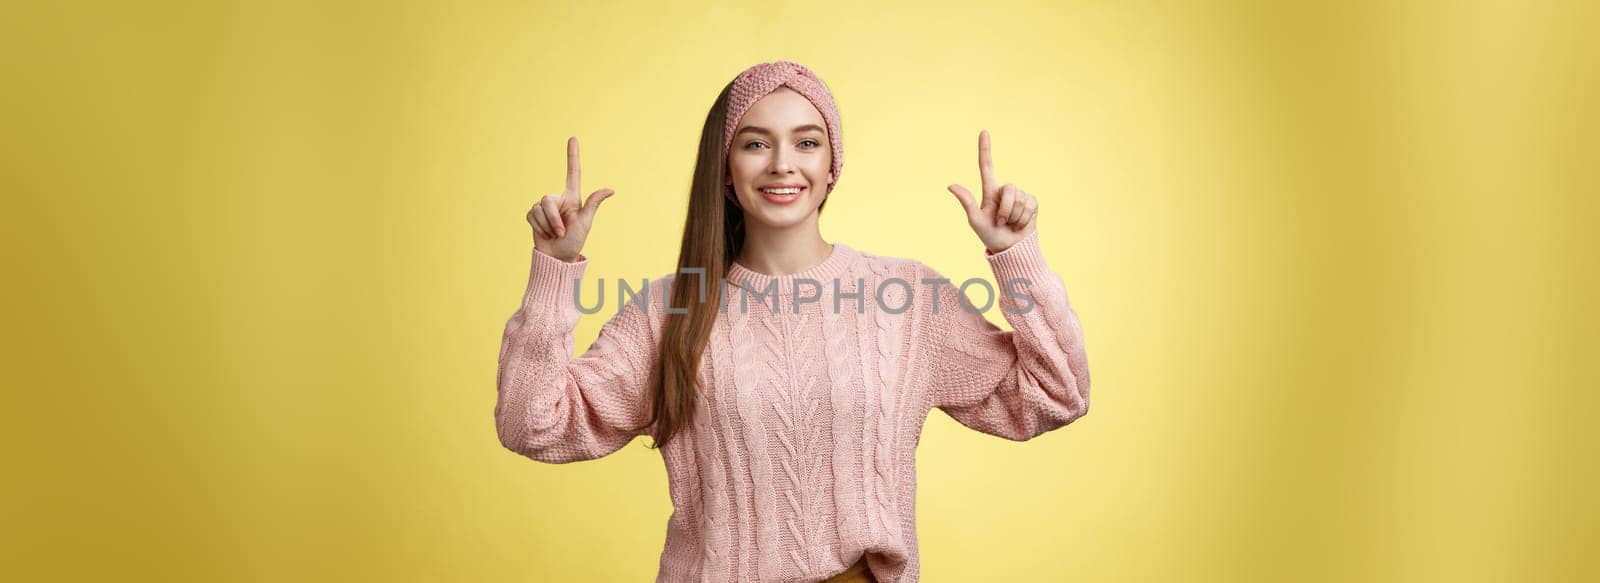 Easygoing beautiful young female student in knitted sweater, headband pointing up, promoting advertisement, smiling happily, feeling positive posing in good mood, grinning at camera over yellow wall by Benzoix